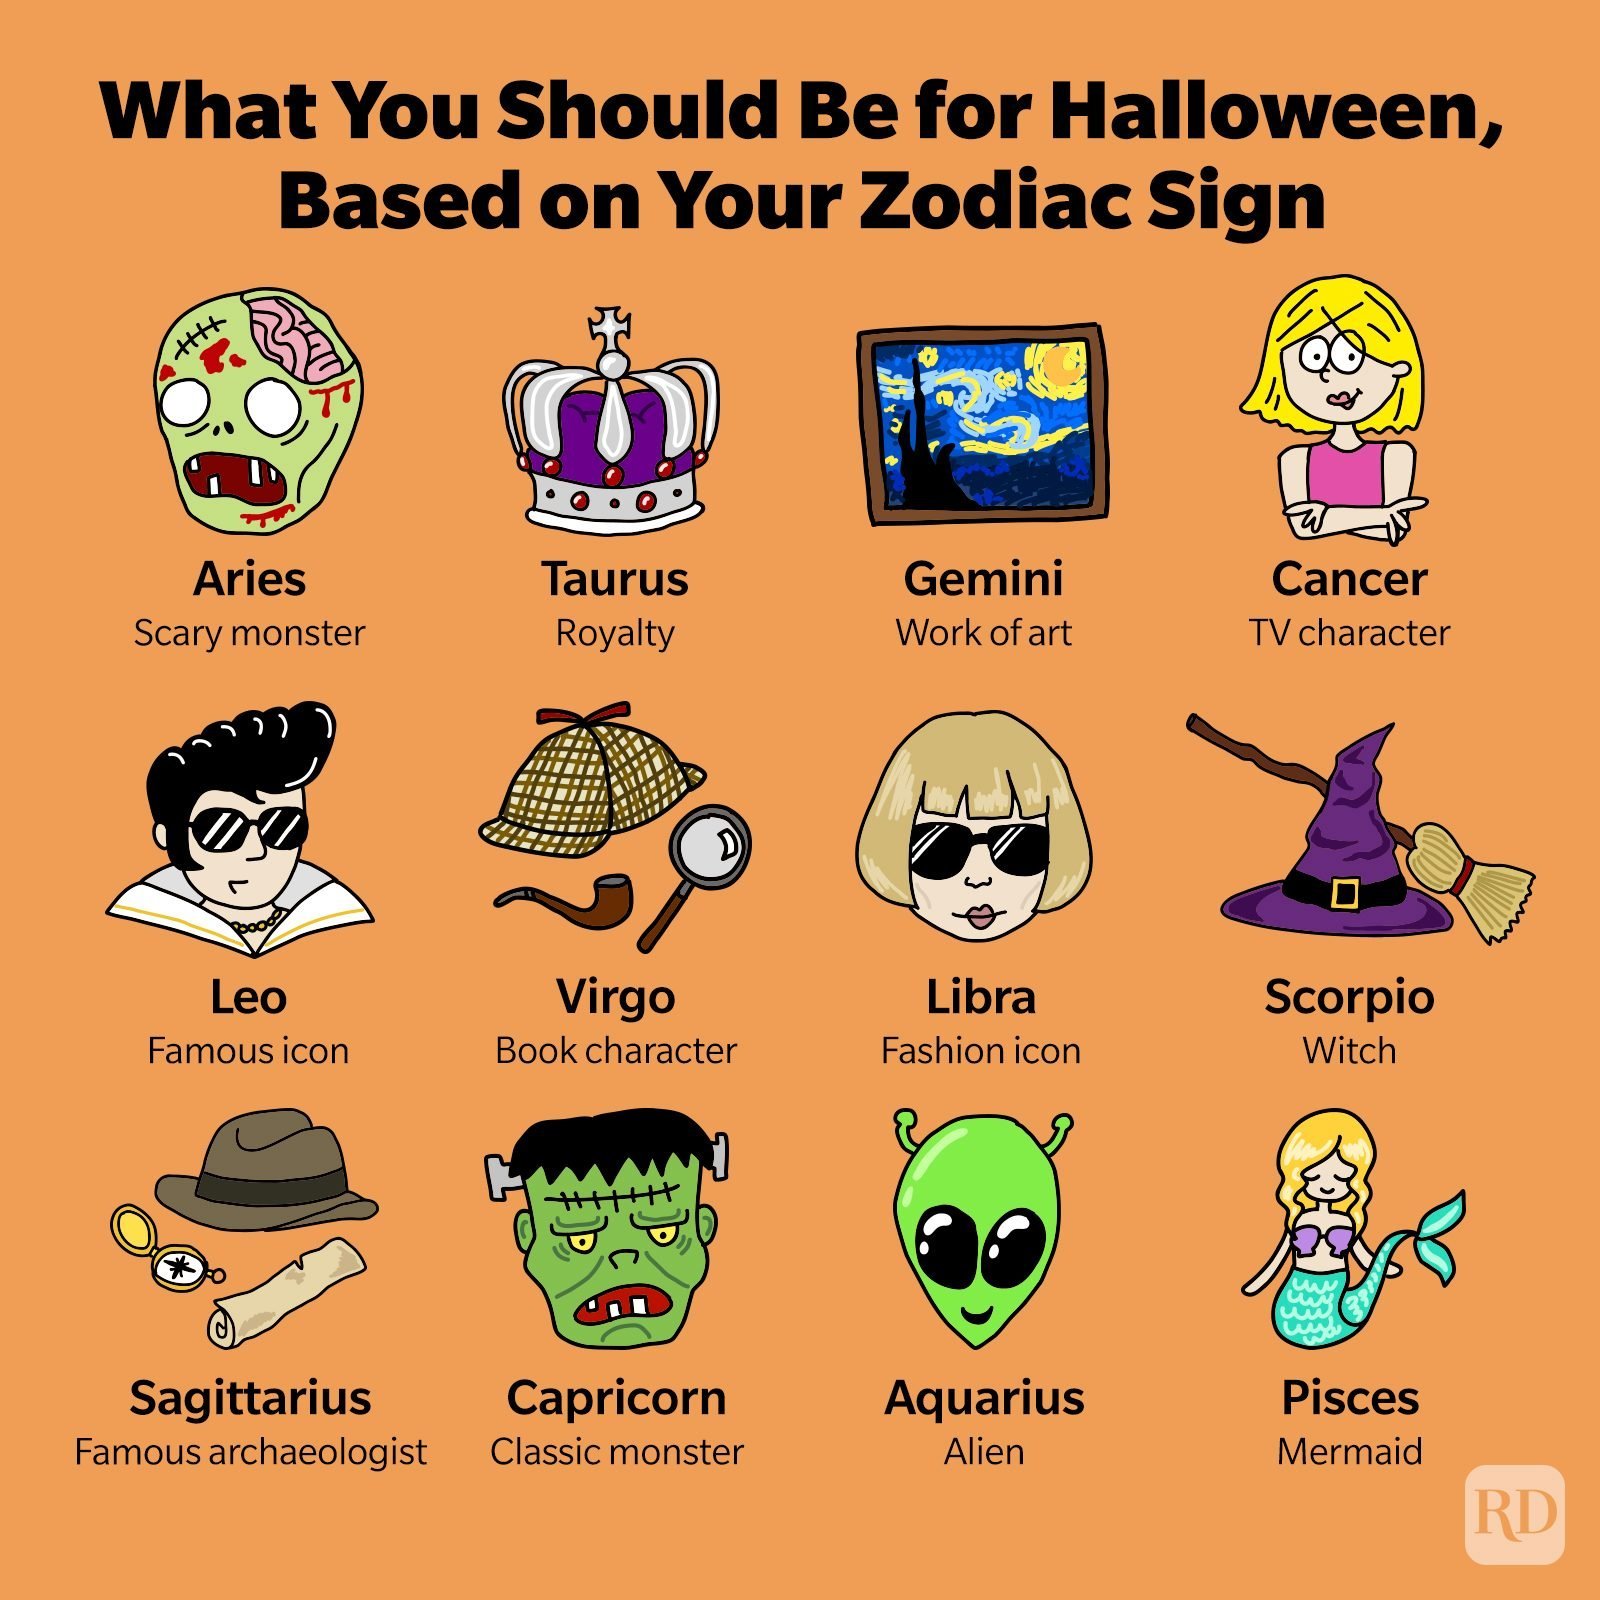 What You Should Be for Halloween, Based on Your Zodiac Sign